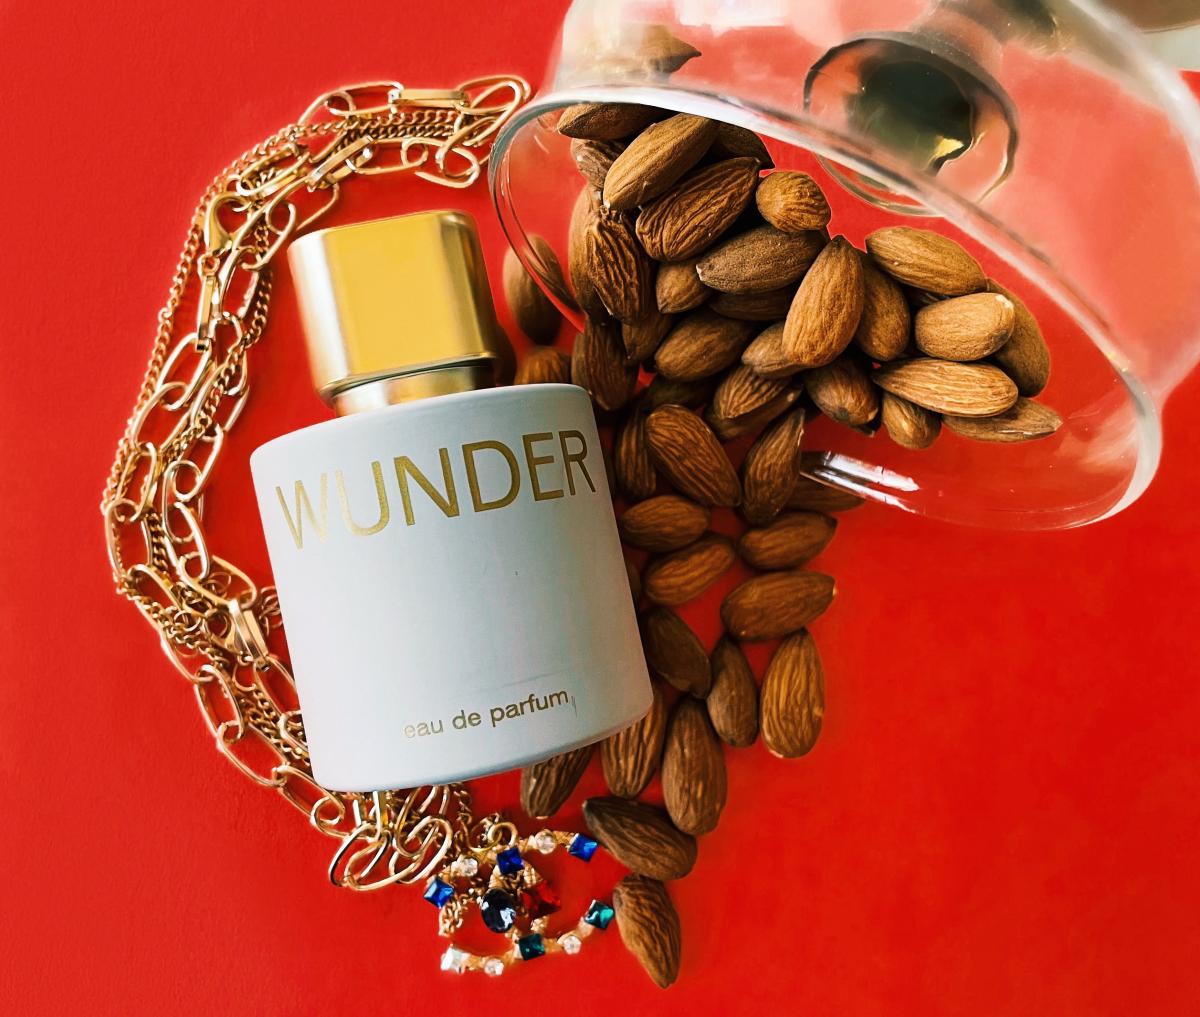 Wunder Mavemade perfume - a fragrance for women and men 2021